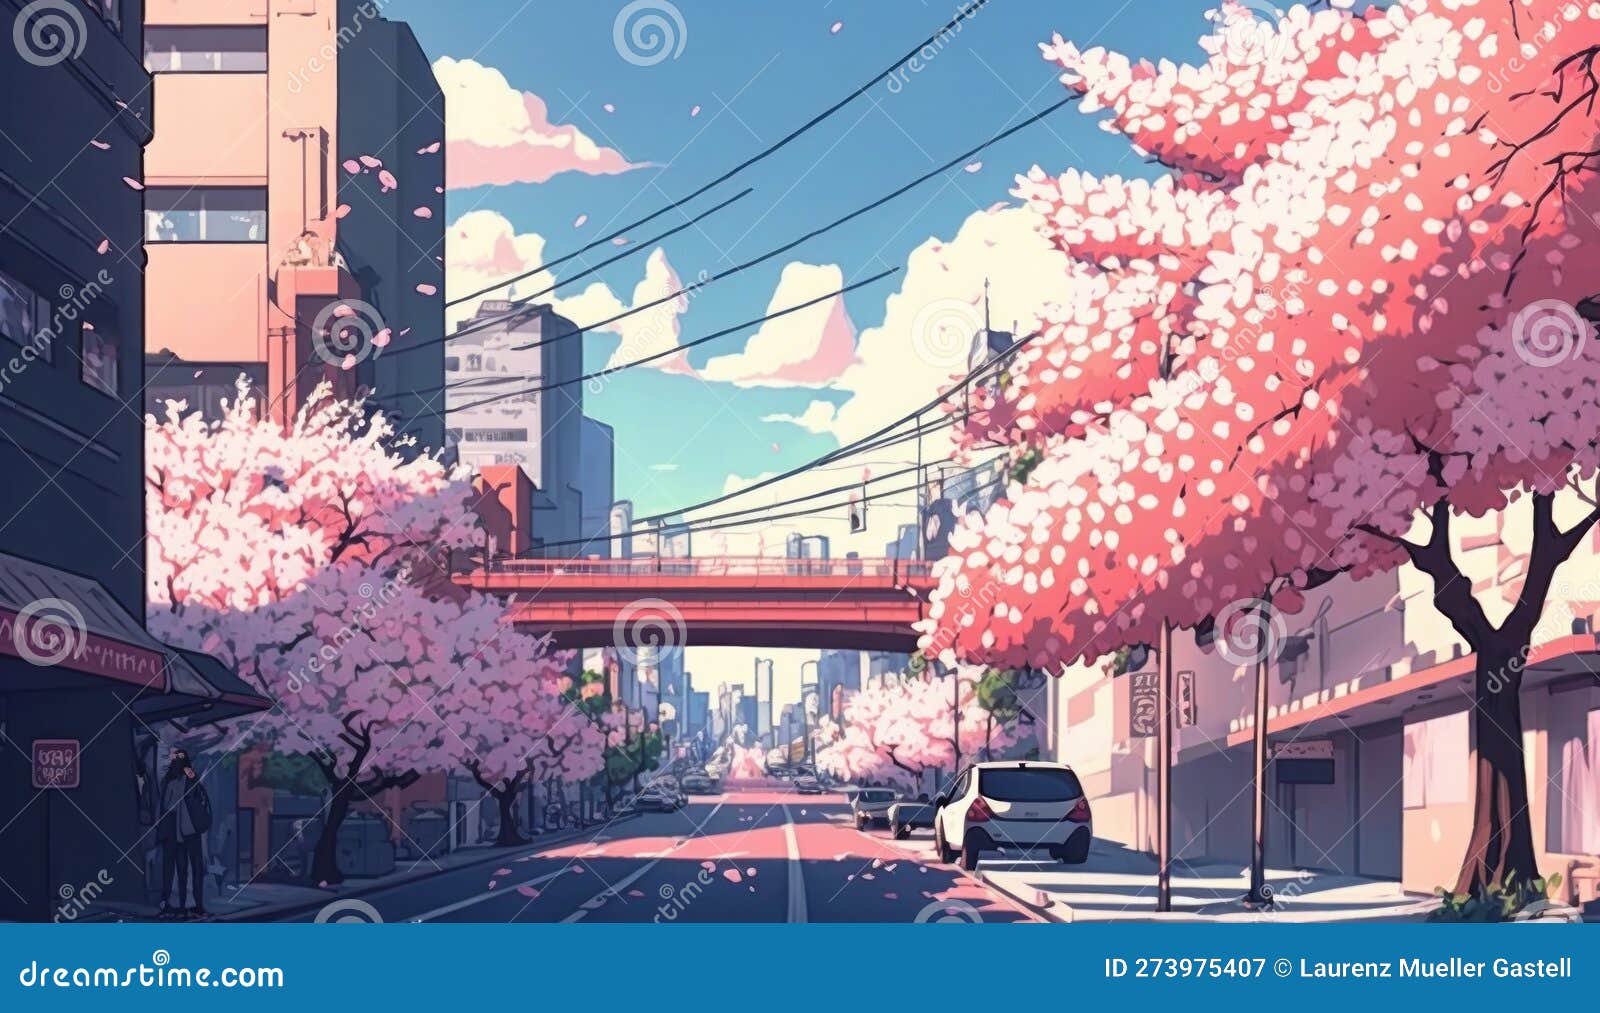 128462 Anime Background Images Stock Photos  Vectors  Shutterstock